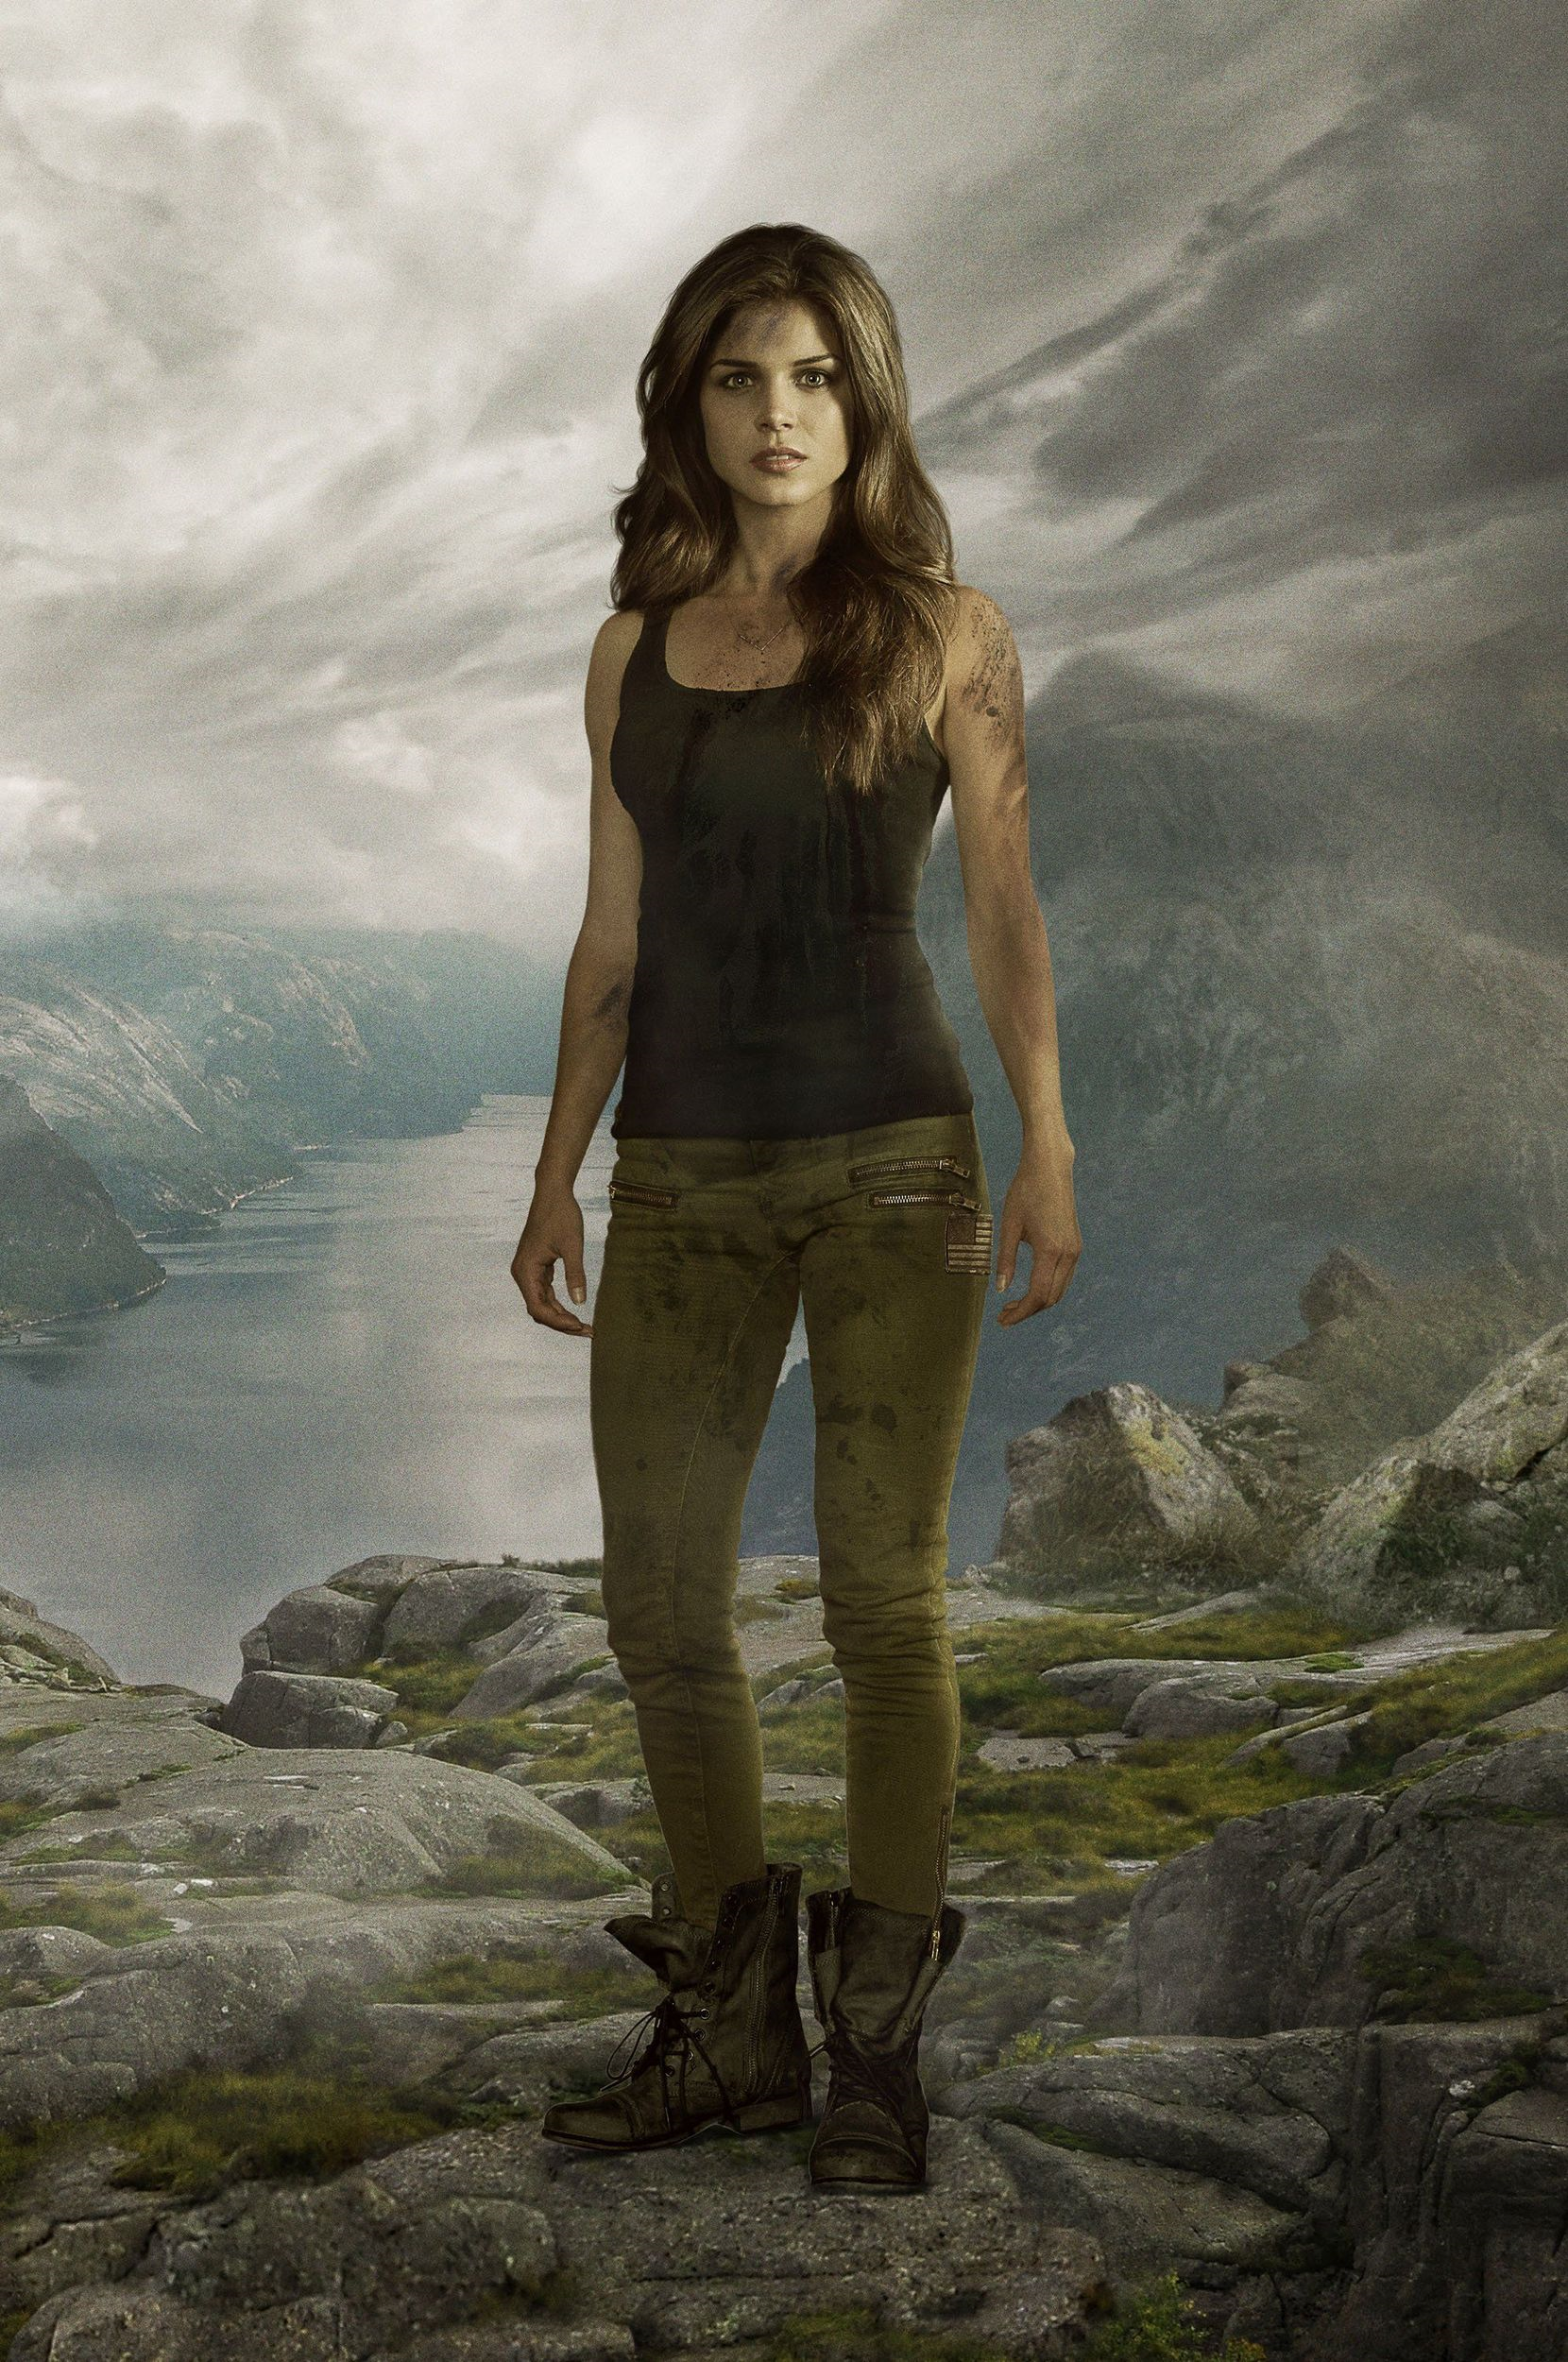 Octavia Blake stands on a rocky cliff in an unfamiliar land in "The 100" season 1 promo shot.